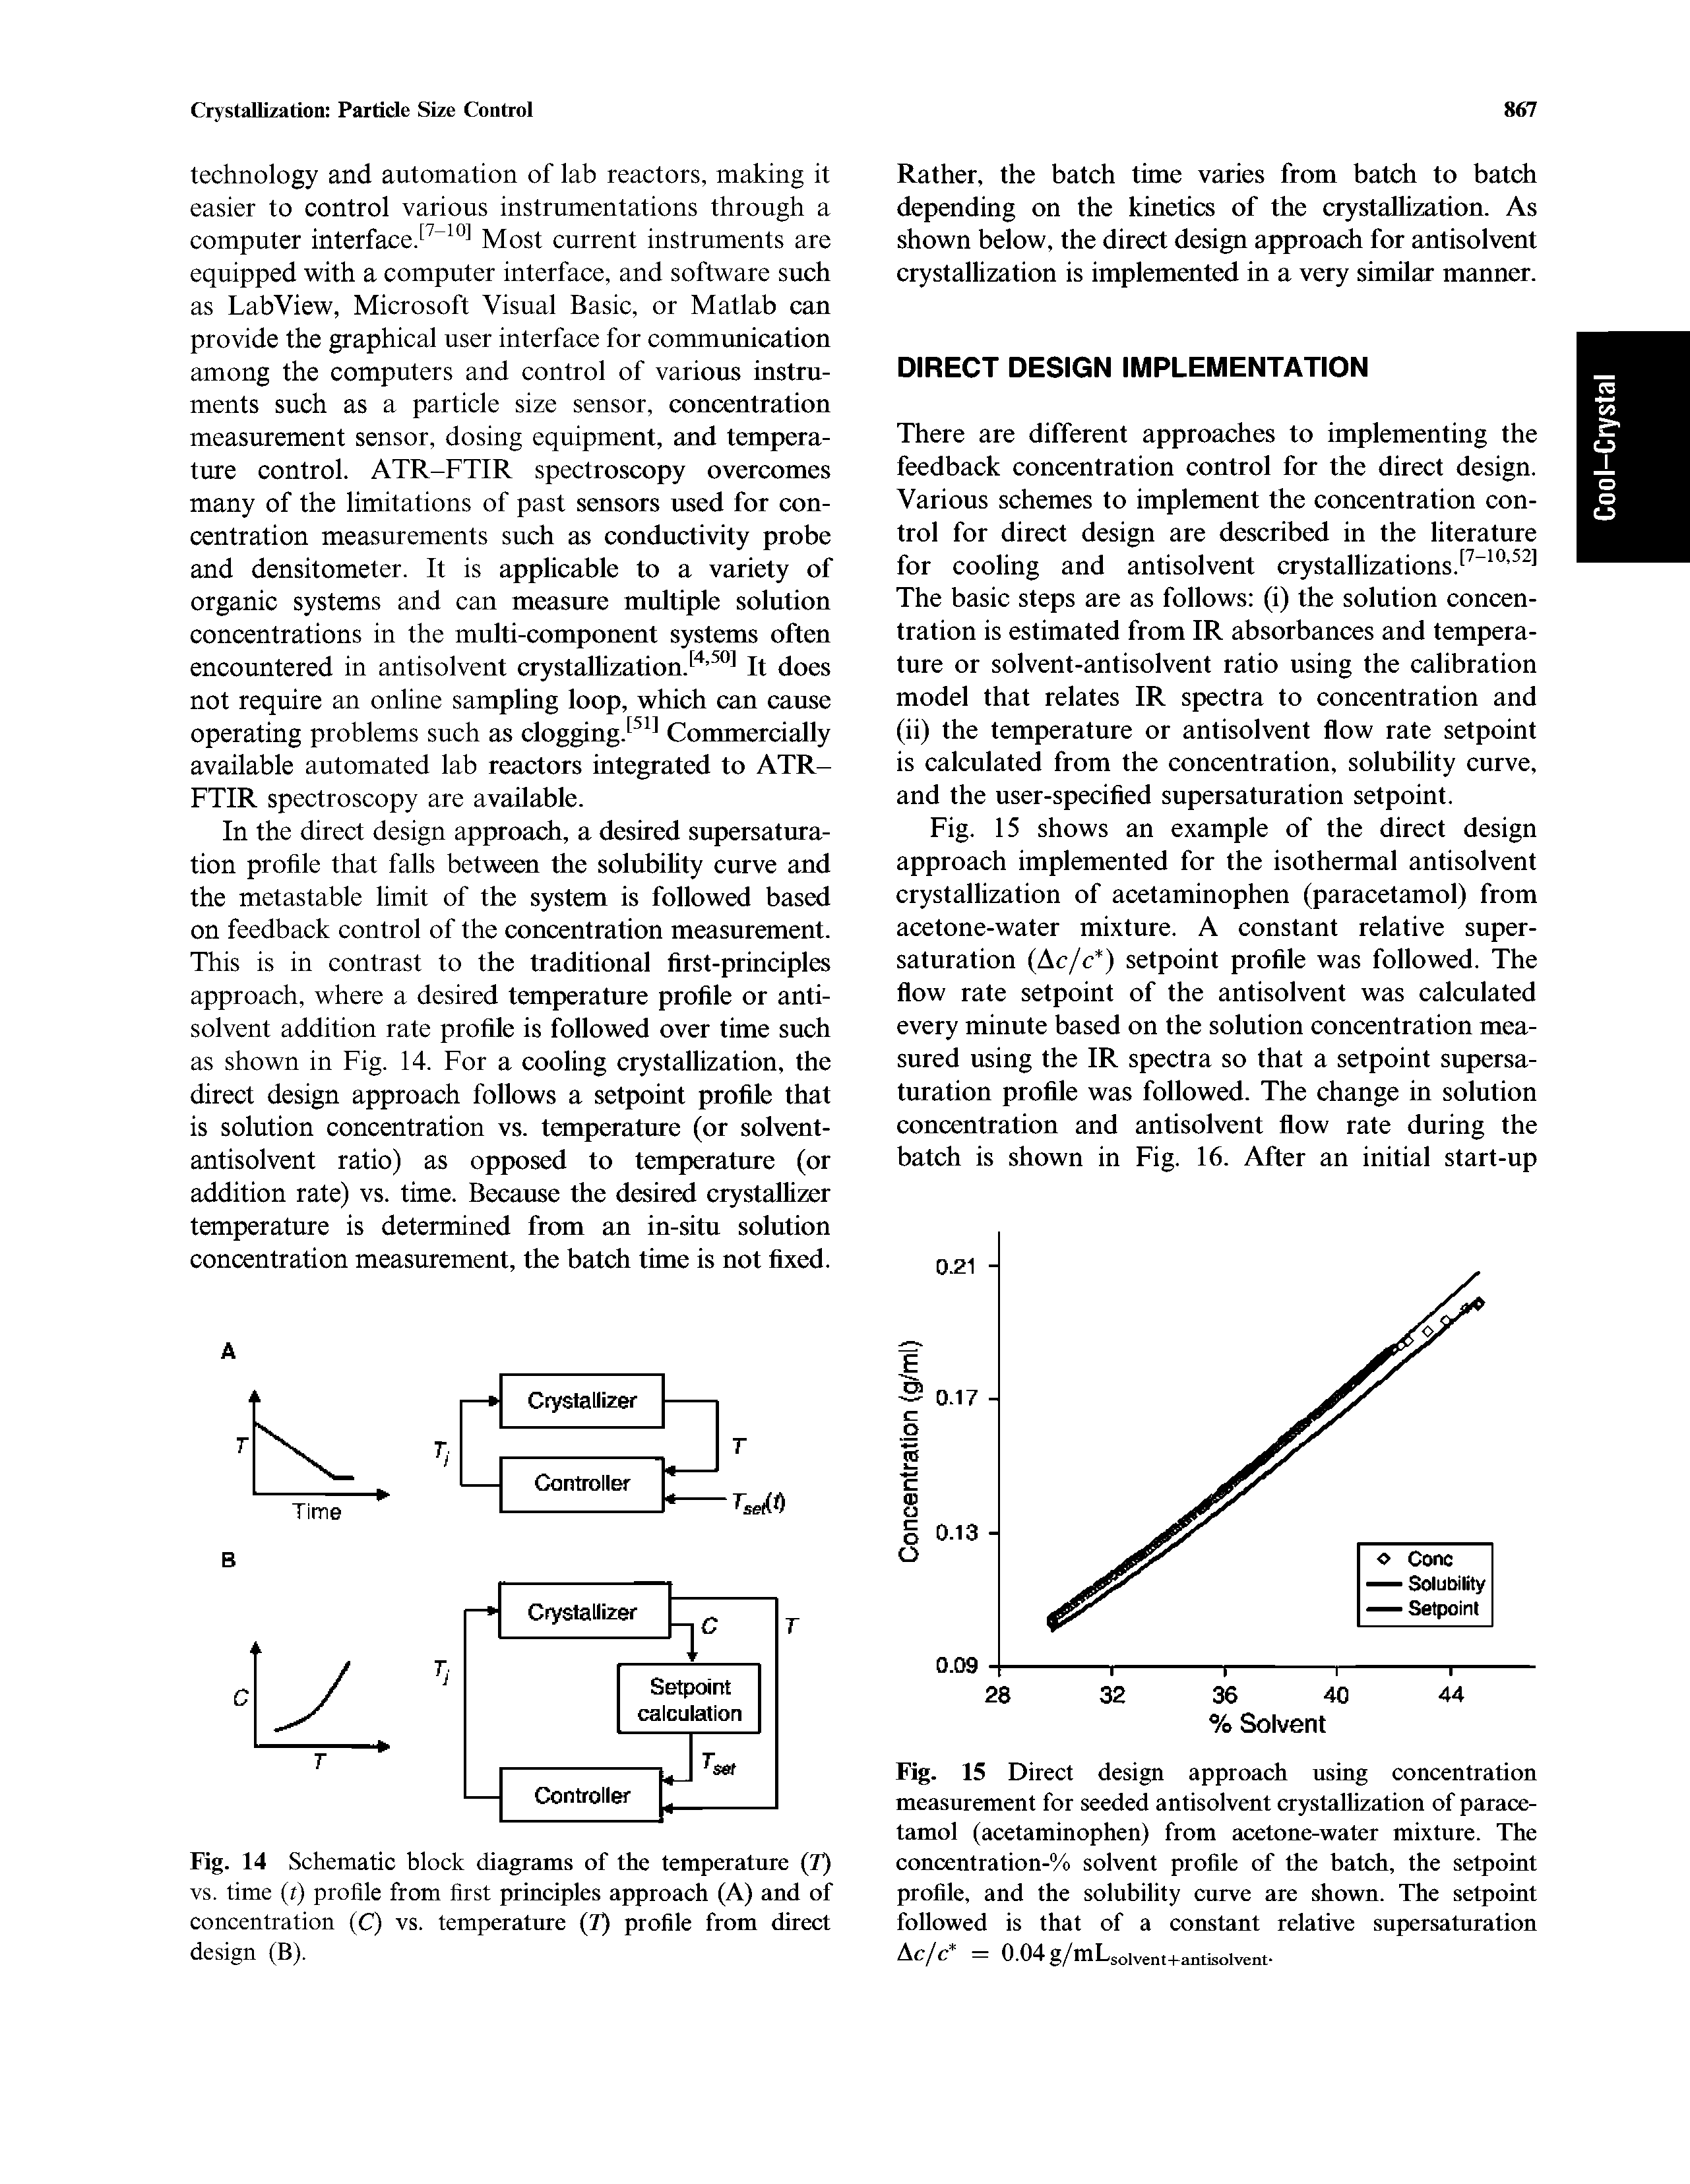 Fig. 15 Direct design approach using concentration measurement for seeded antisolvent crystallization of paracetamol (acetaminophen) from acetone-water mixture. The concentration-% solvent profile of the batch, the setpoint profile, and the solubility curve are shown. The setpoint followed is that of a constant relative supersaturation Ac/c = 0.04 g/mLsolvent+antisolvent"...